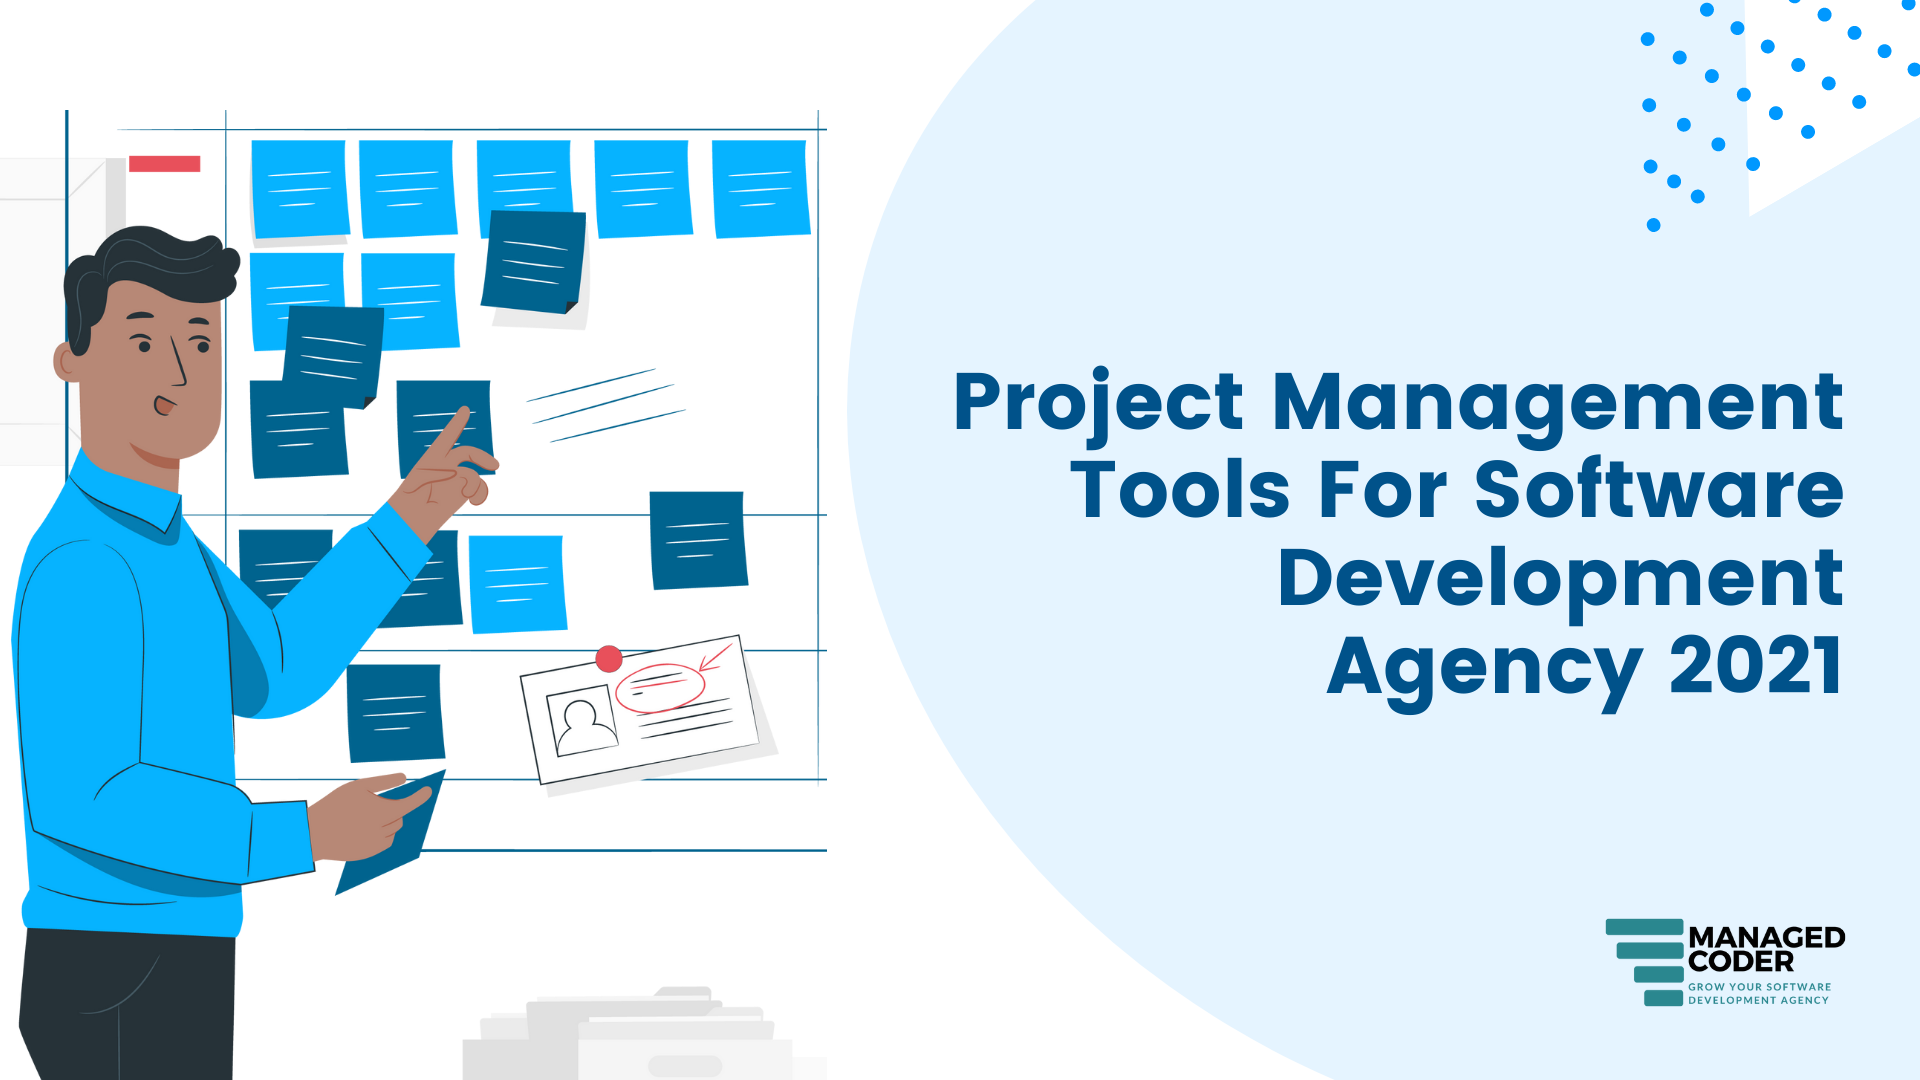 Project Management Tools For Software Agency